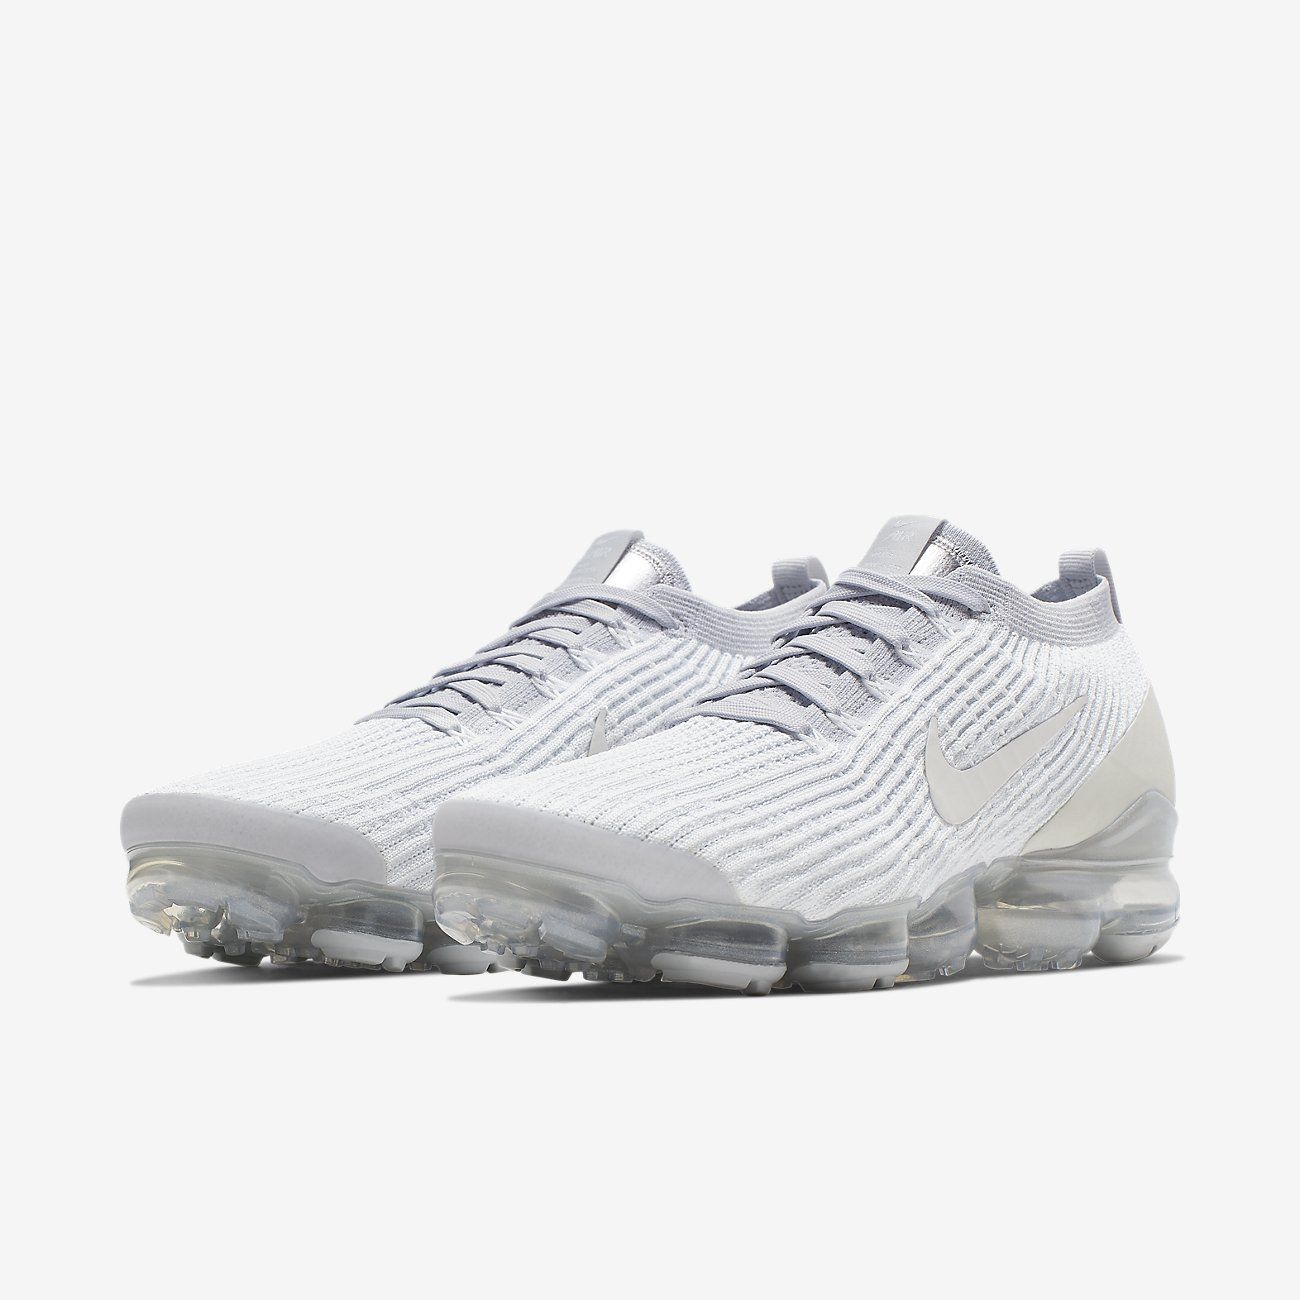 KicksFinder on "Ad: NEW Nike VaporMax Flyknit 3 colorwyas are now available at Nikestore! Triple White https://t.co/Y7H4Wujicy Aviator Grey https://t.co/TBFVXO4cee https://t.co/tBEtmKUHlV" Twitter